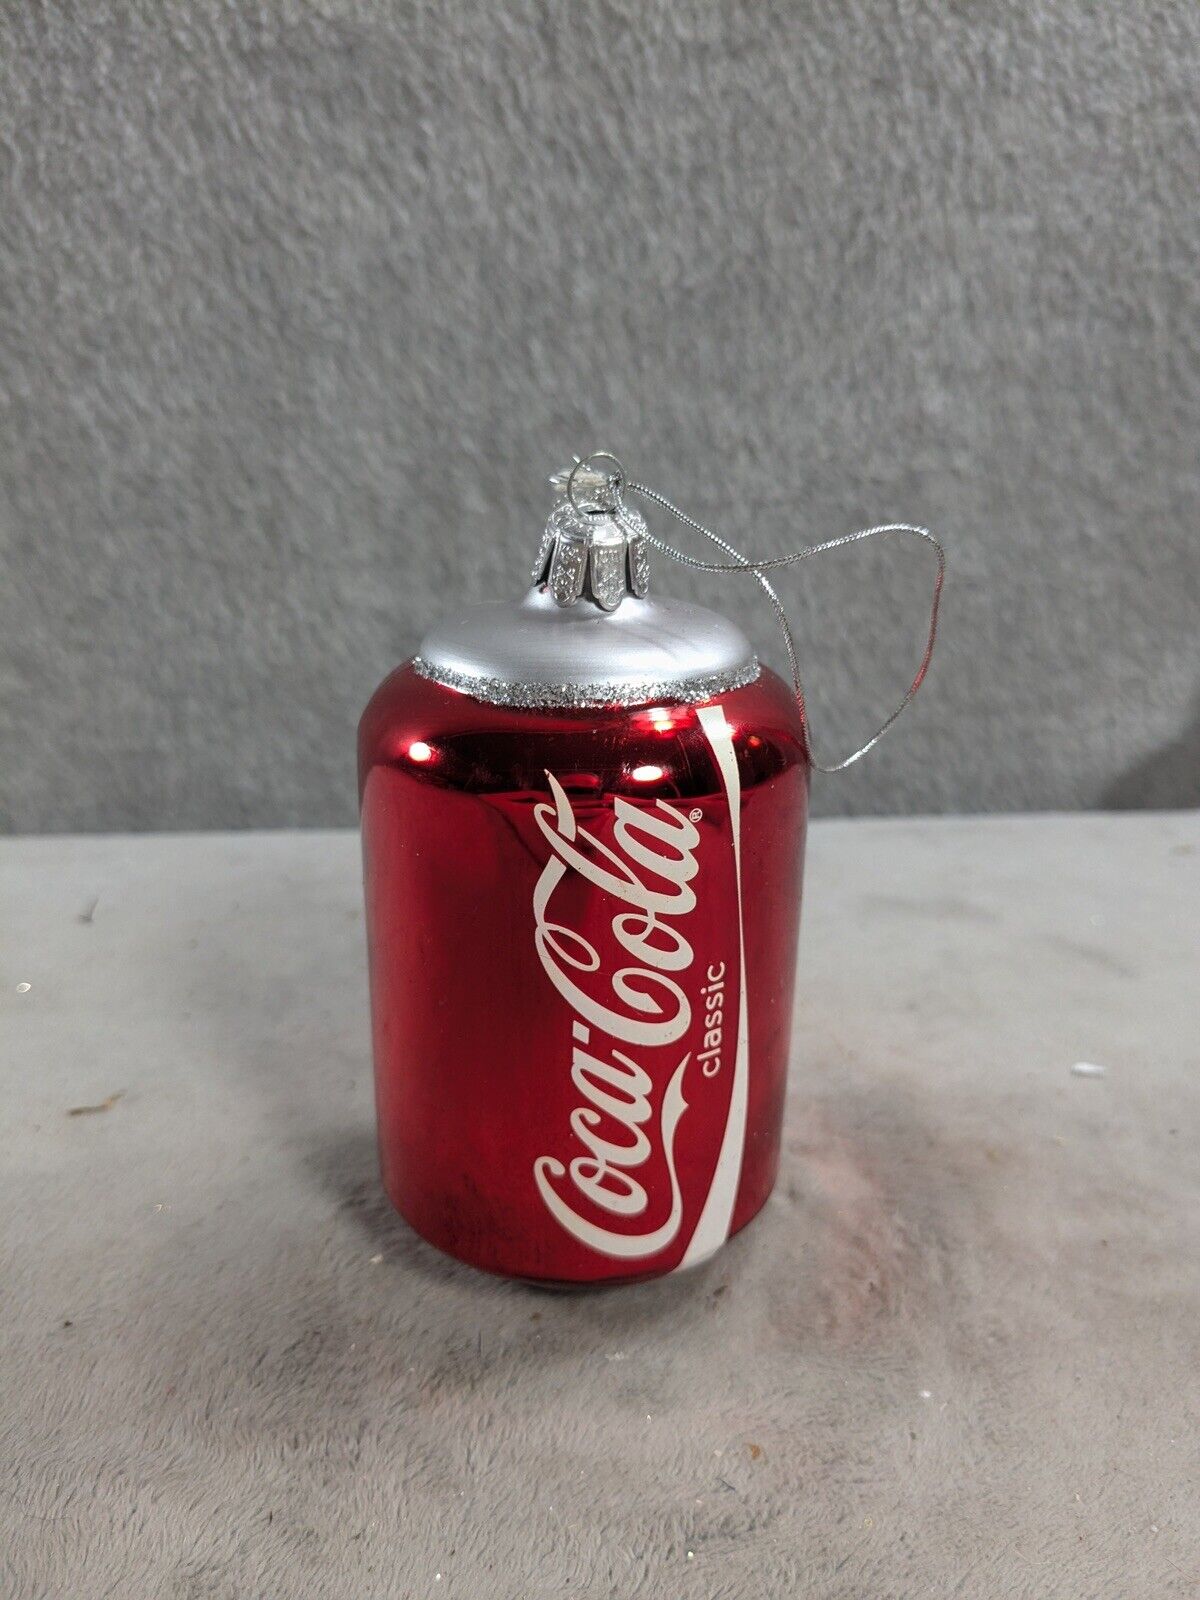  Coca-Cola Kurt Adler Handcrafted Glass Red Coke Can Holiday Christmas Ornament